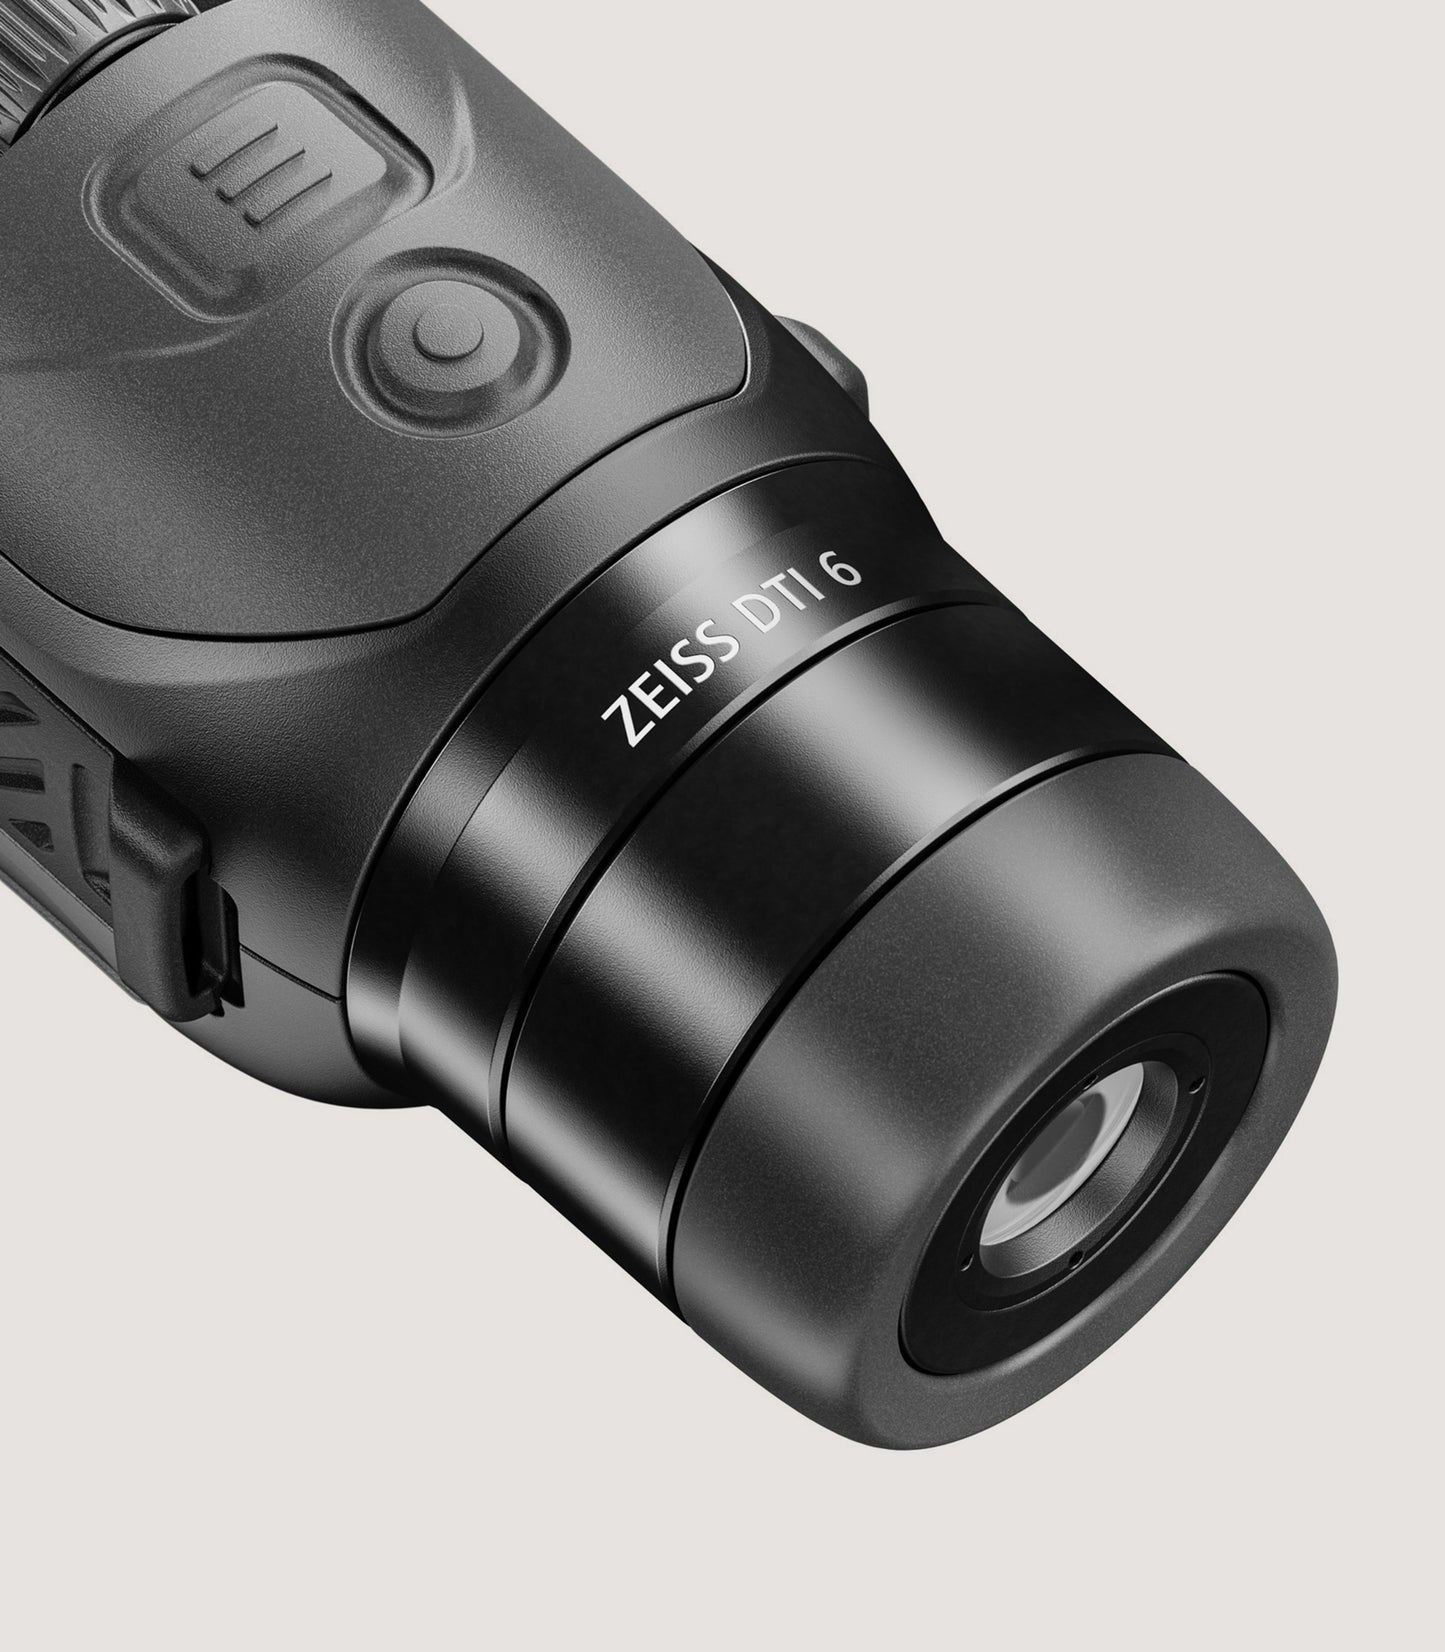 Zeiss Thermal Imaging Camera DTI 6/40 With 20mm Lens In Black